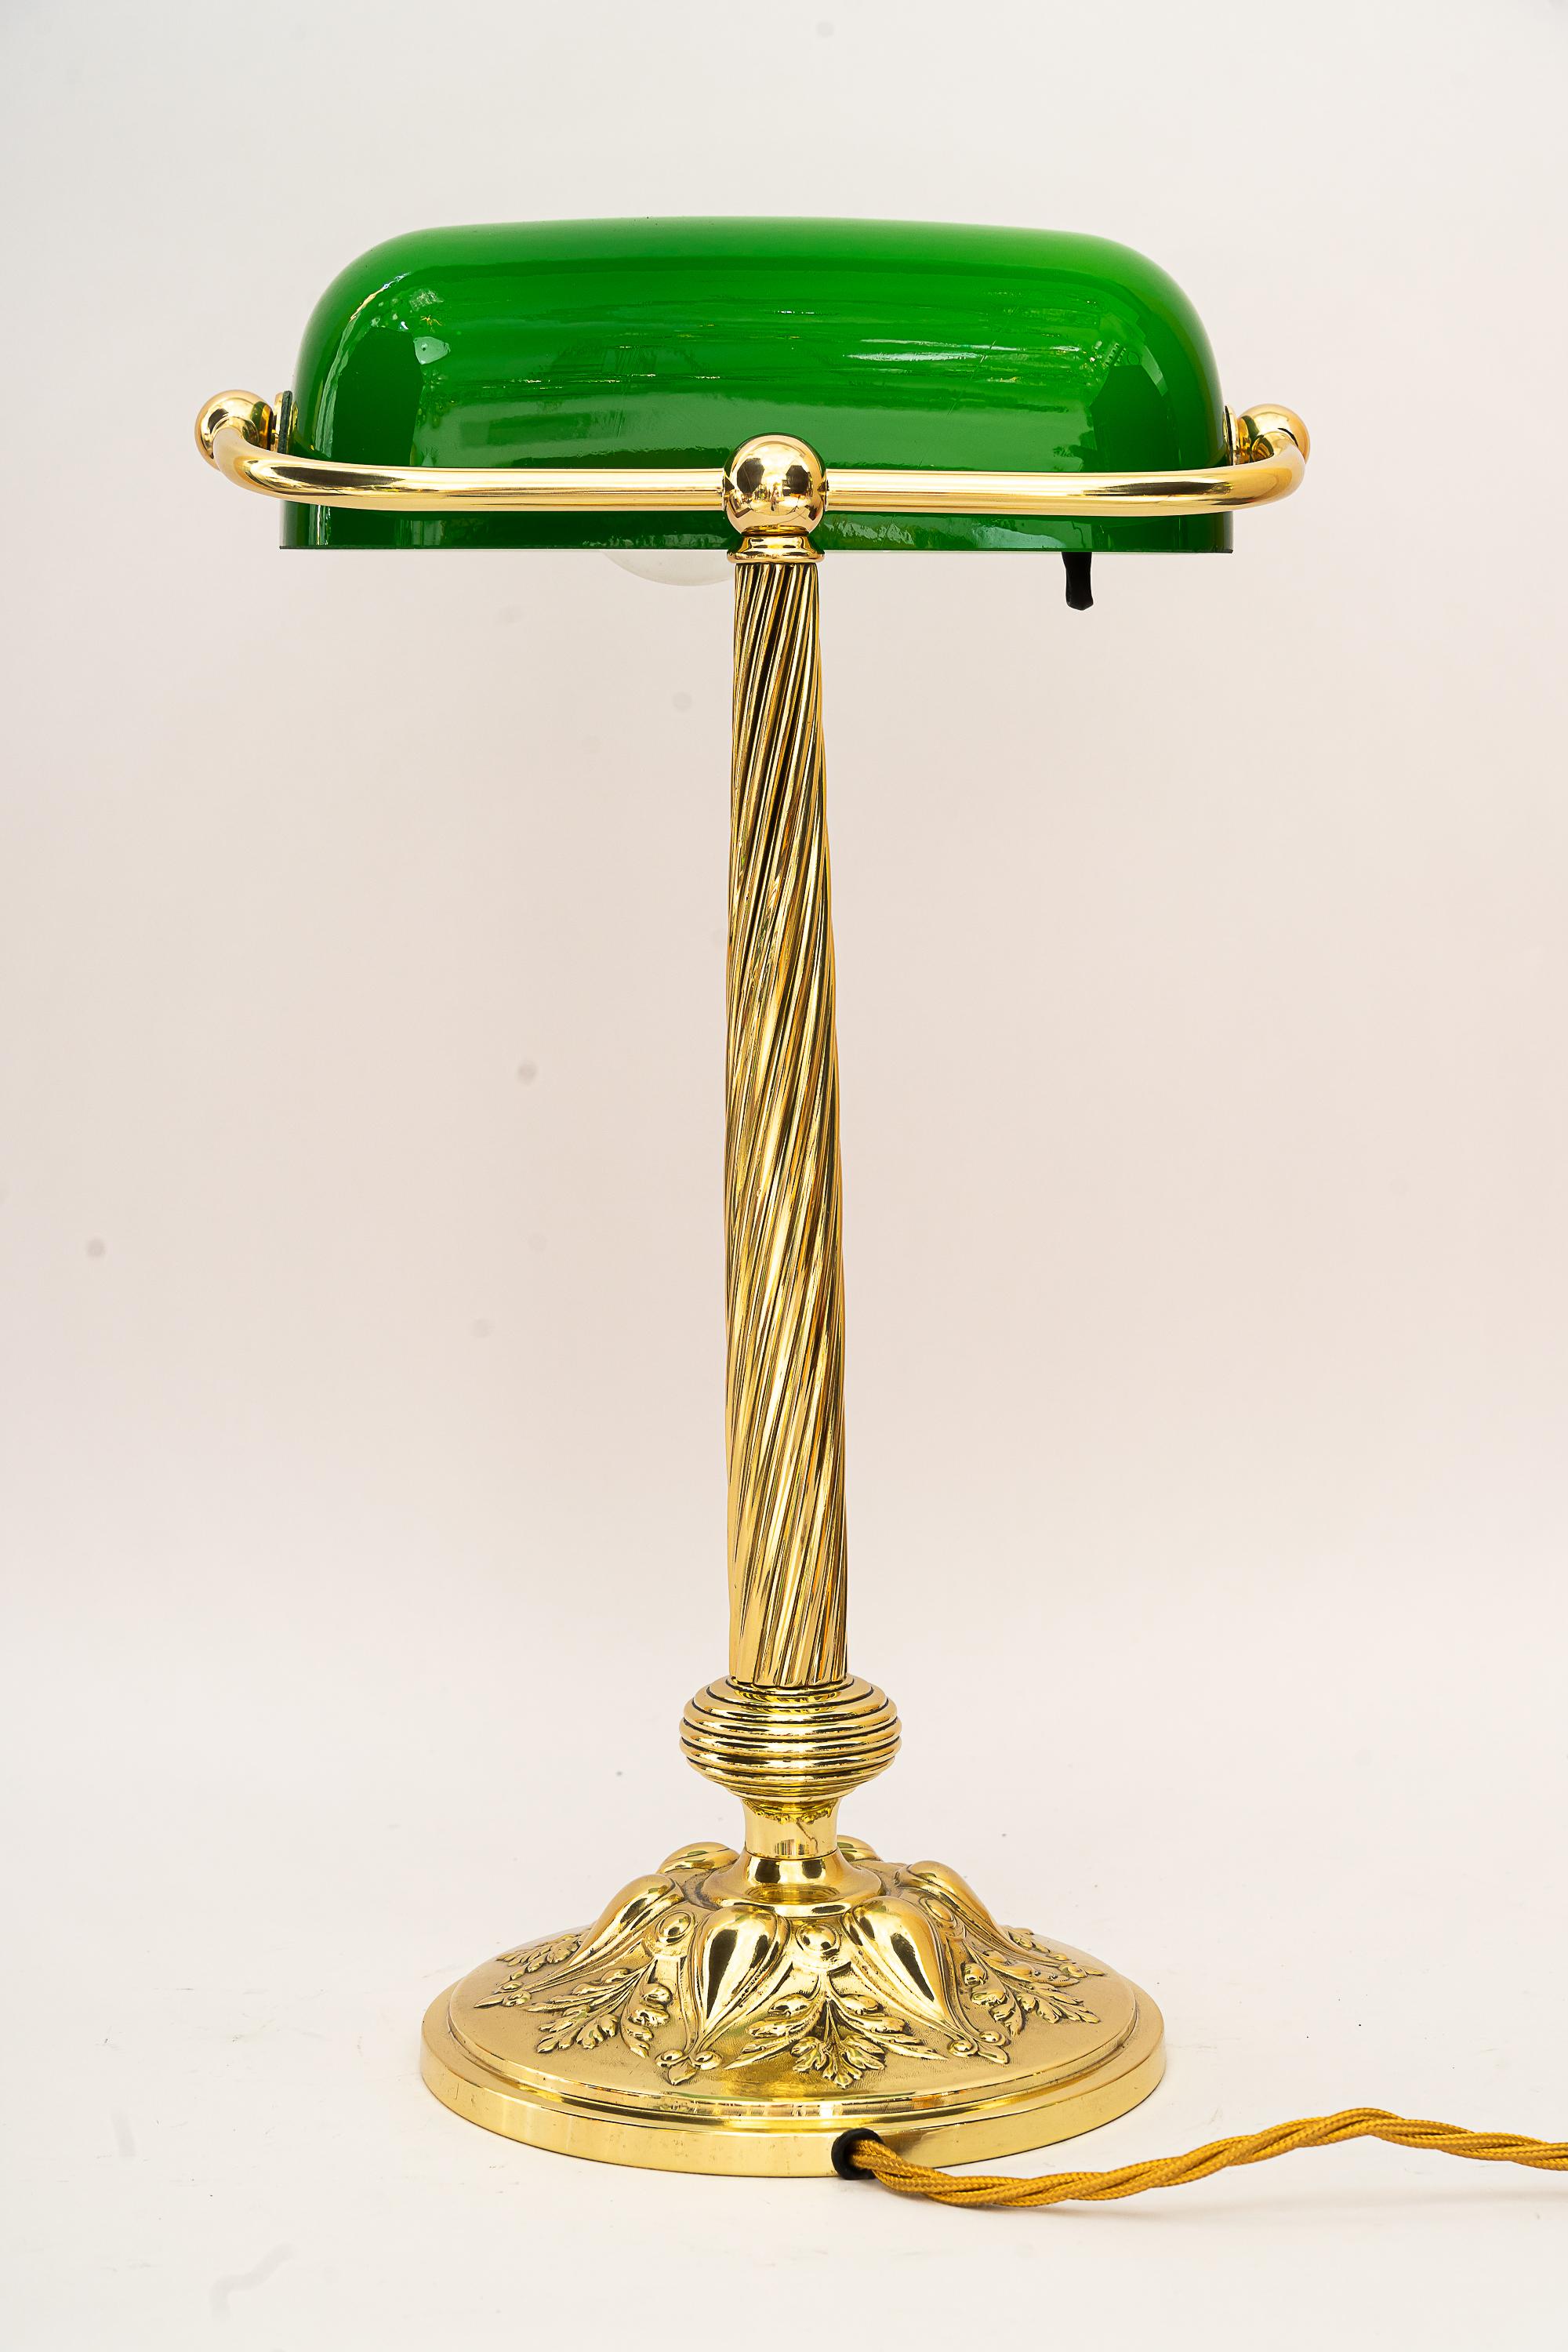 Adjustable Banker lamp around 1920s
Brass polished and stove enameled